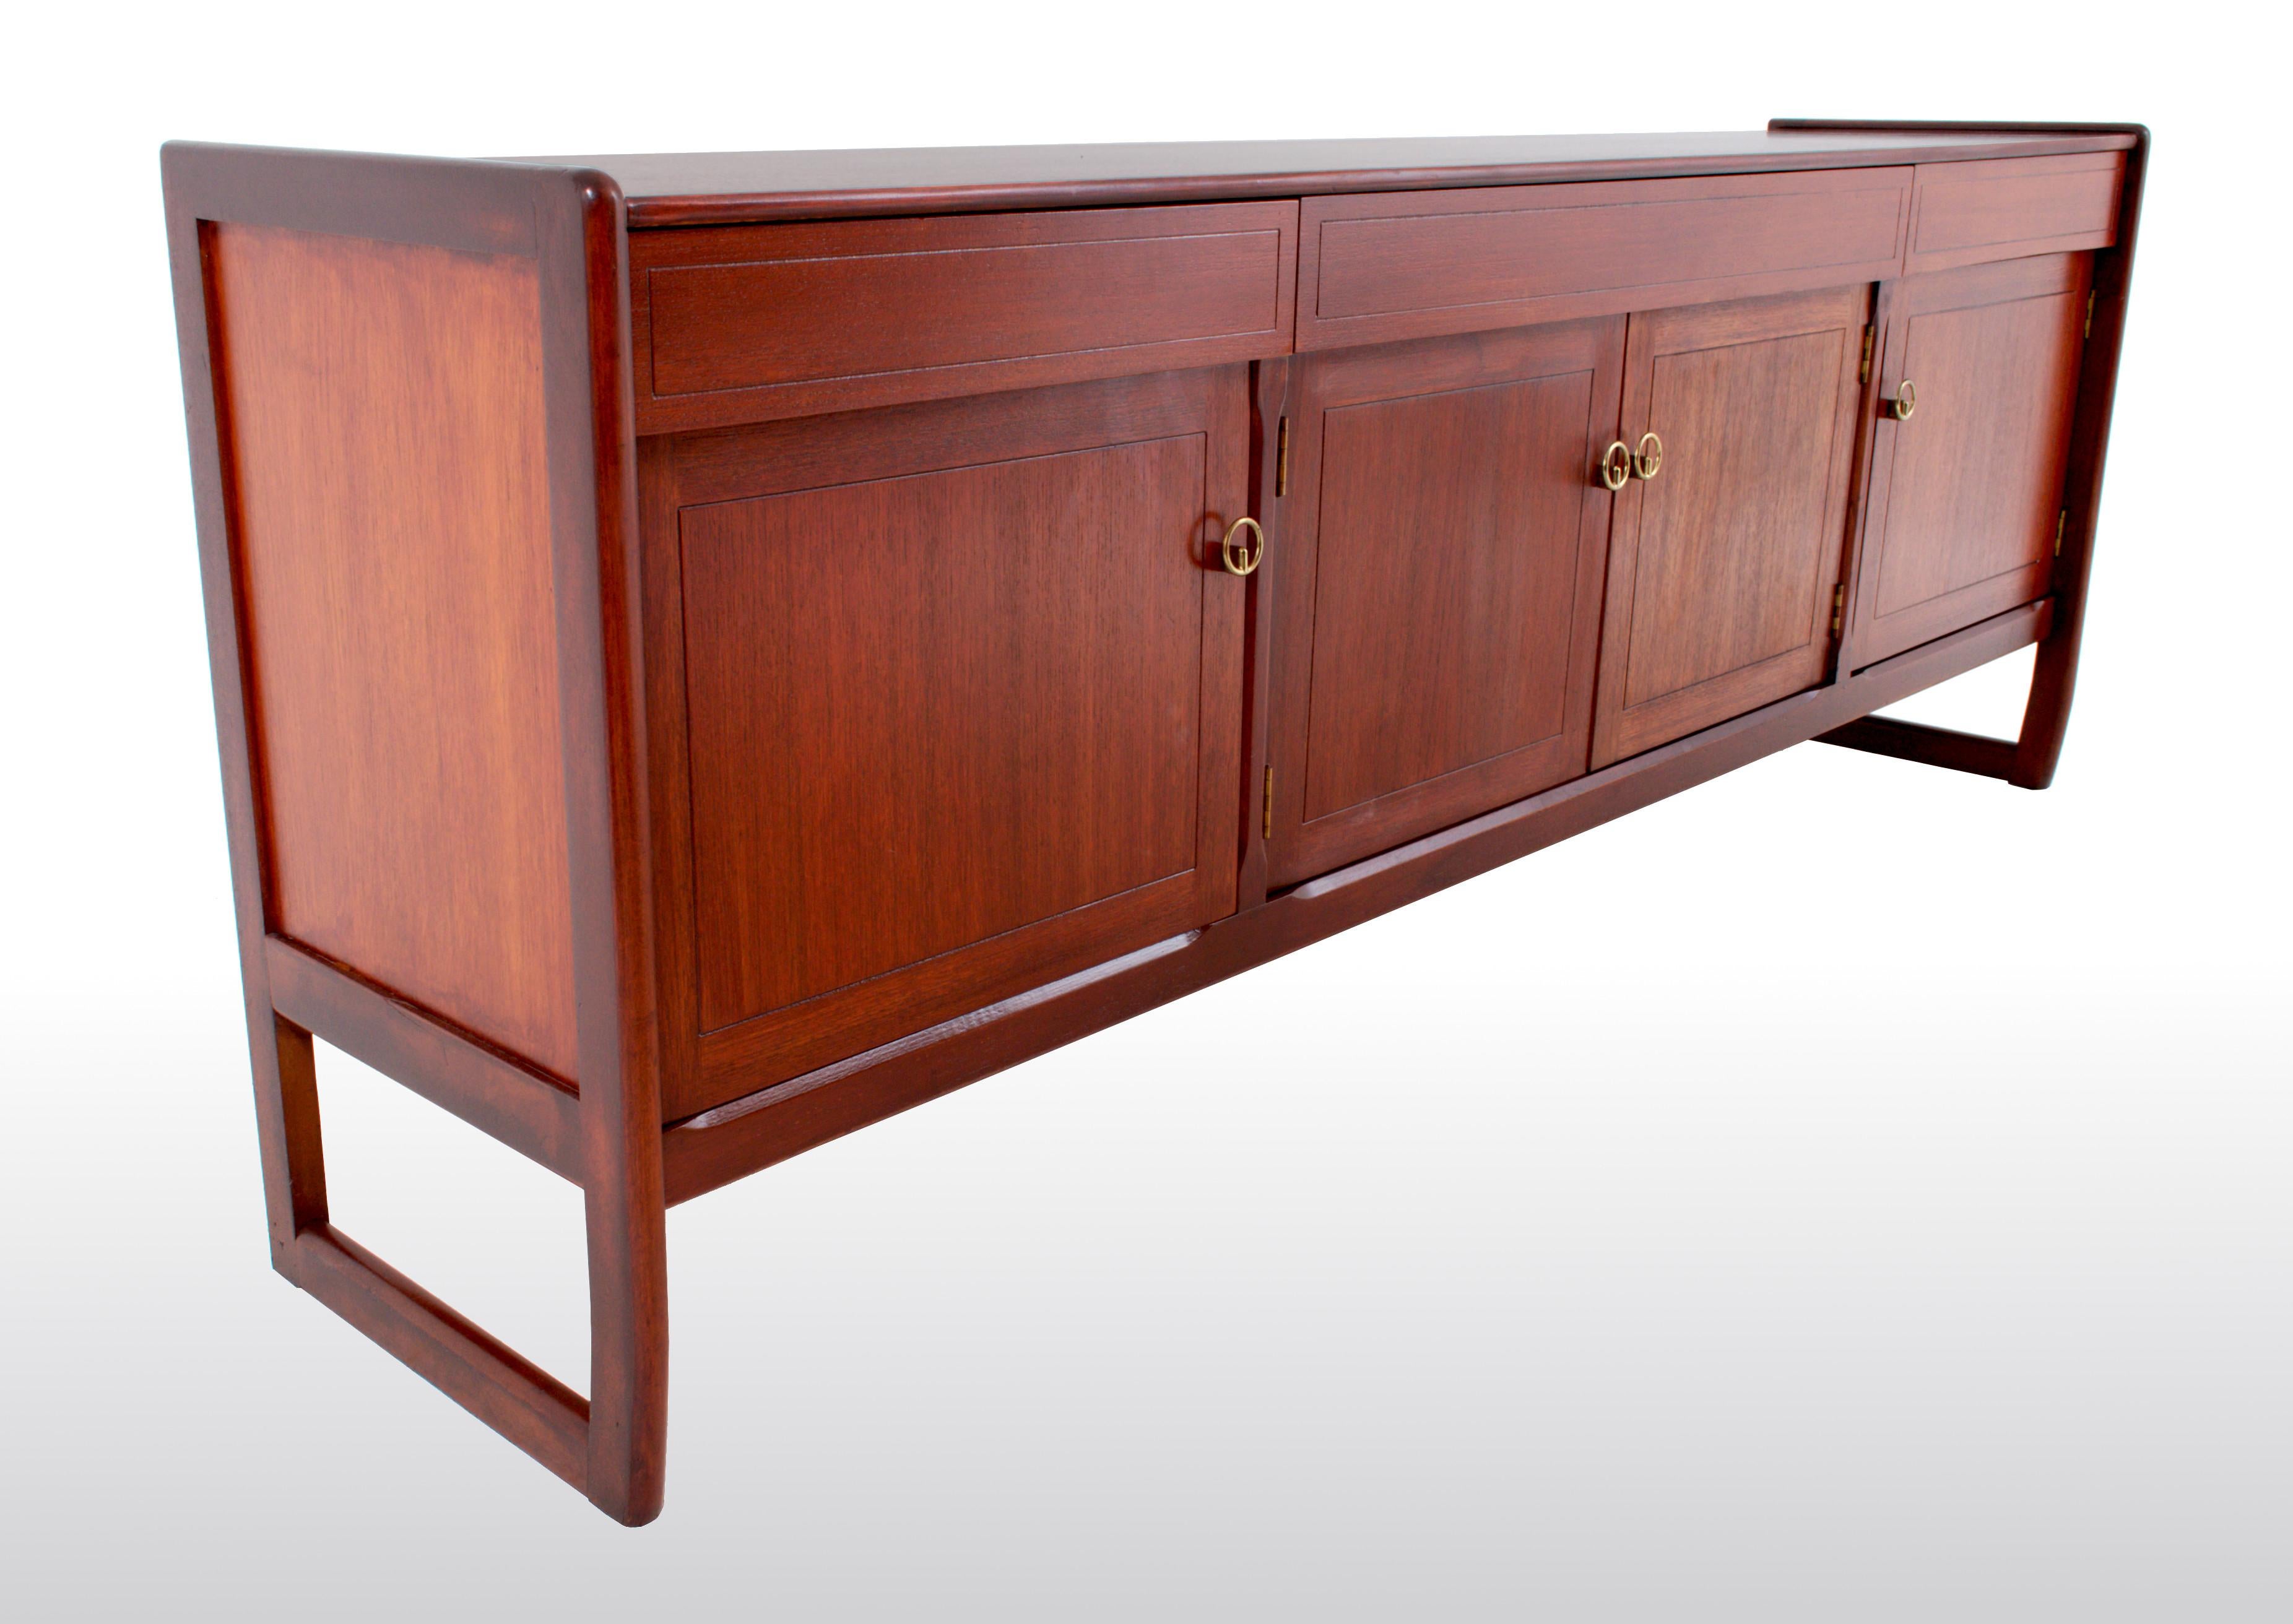 Mid-Century Modern Danish style credenza in walnut, 1960s. This sleek credenza having three drawers to the top, four cupboard doors below, each enclosing a single shelf. The credenza raised on continuous legs.